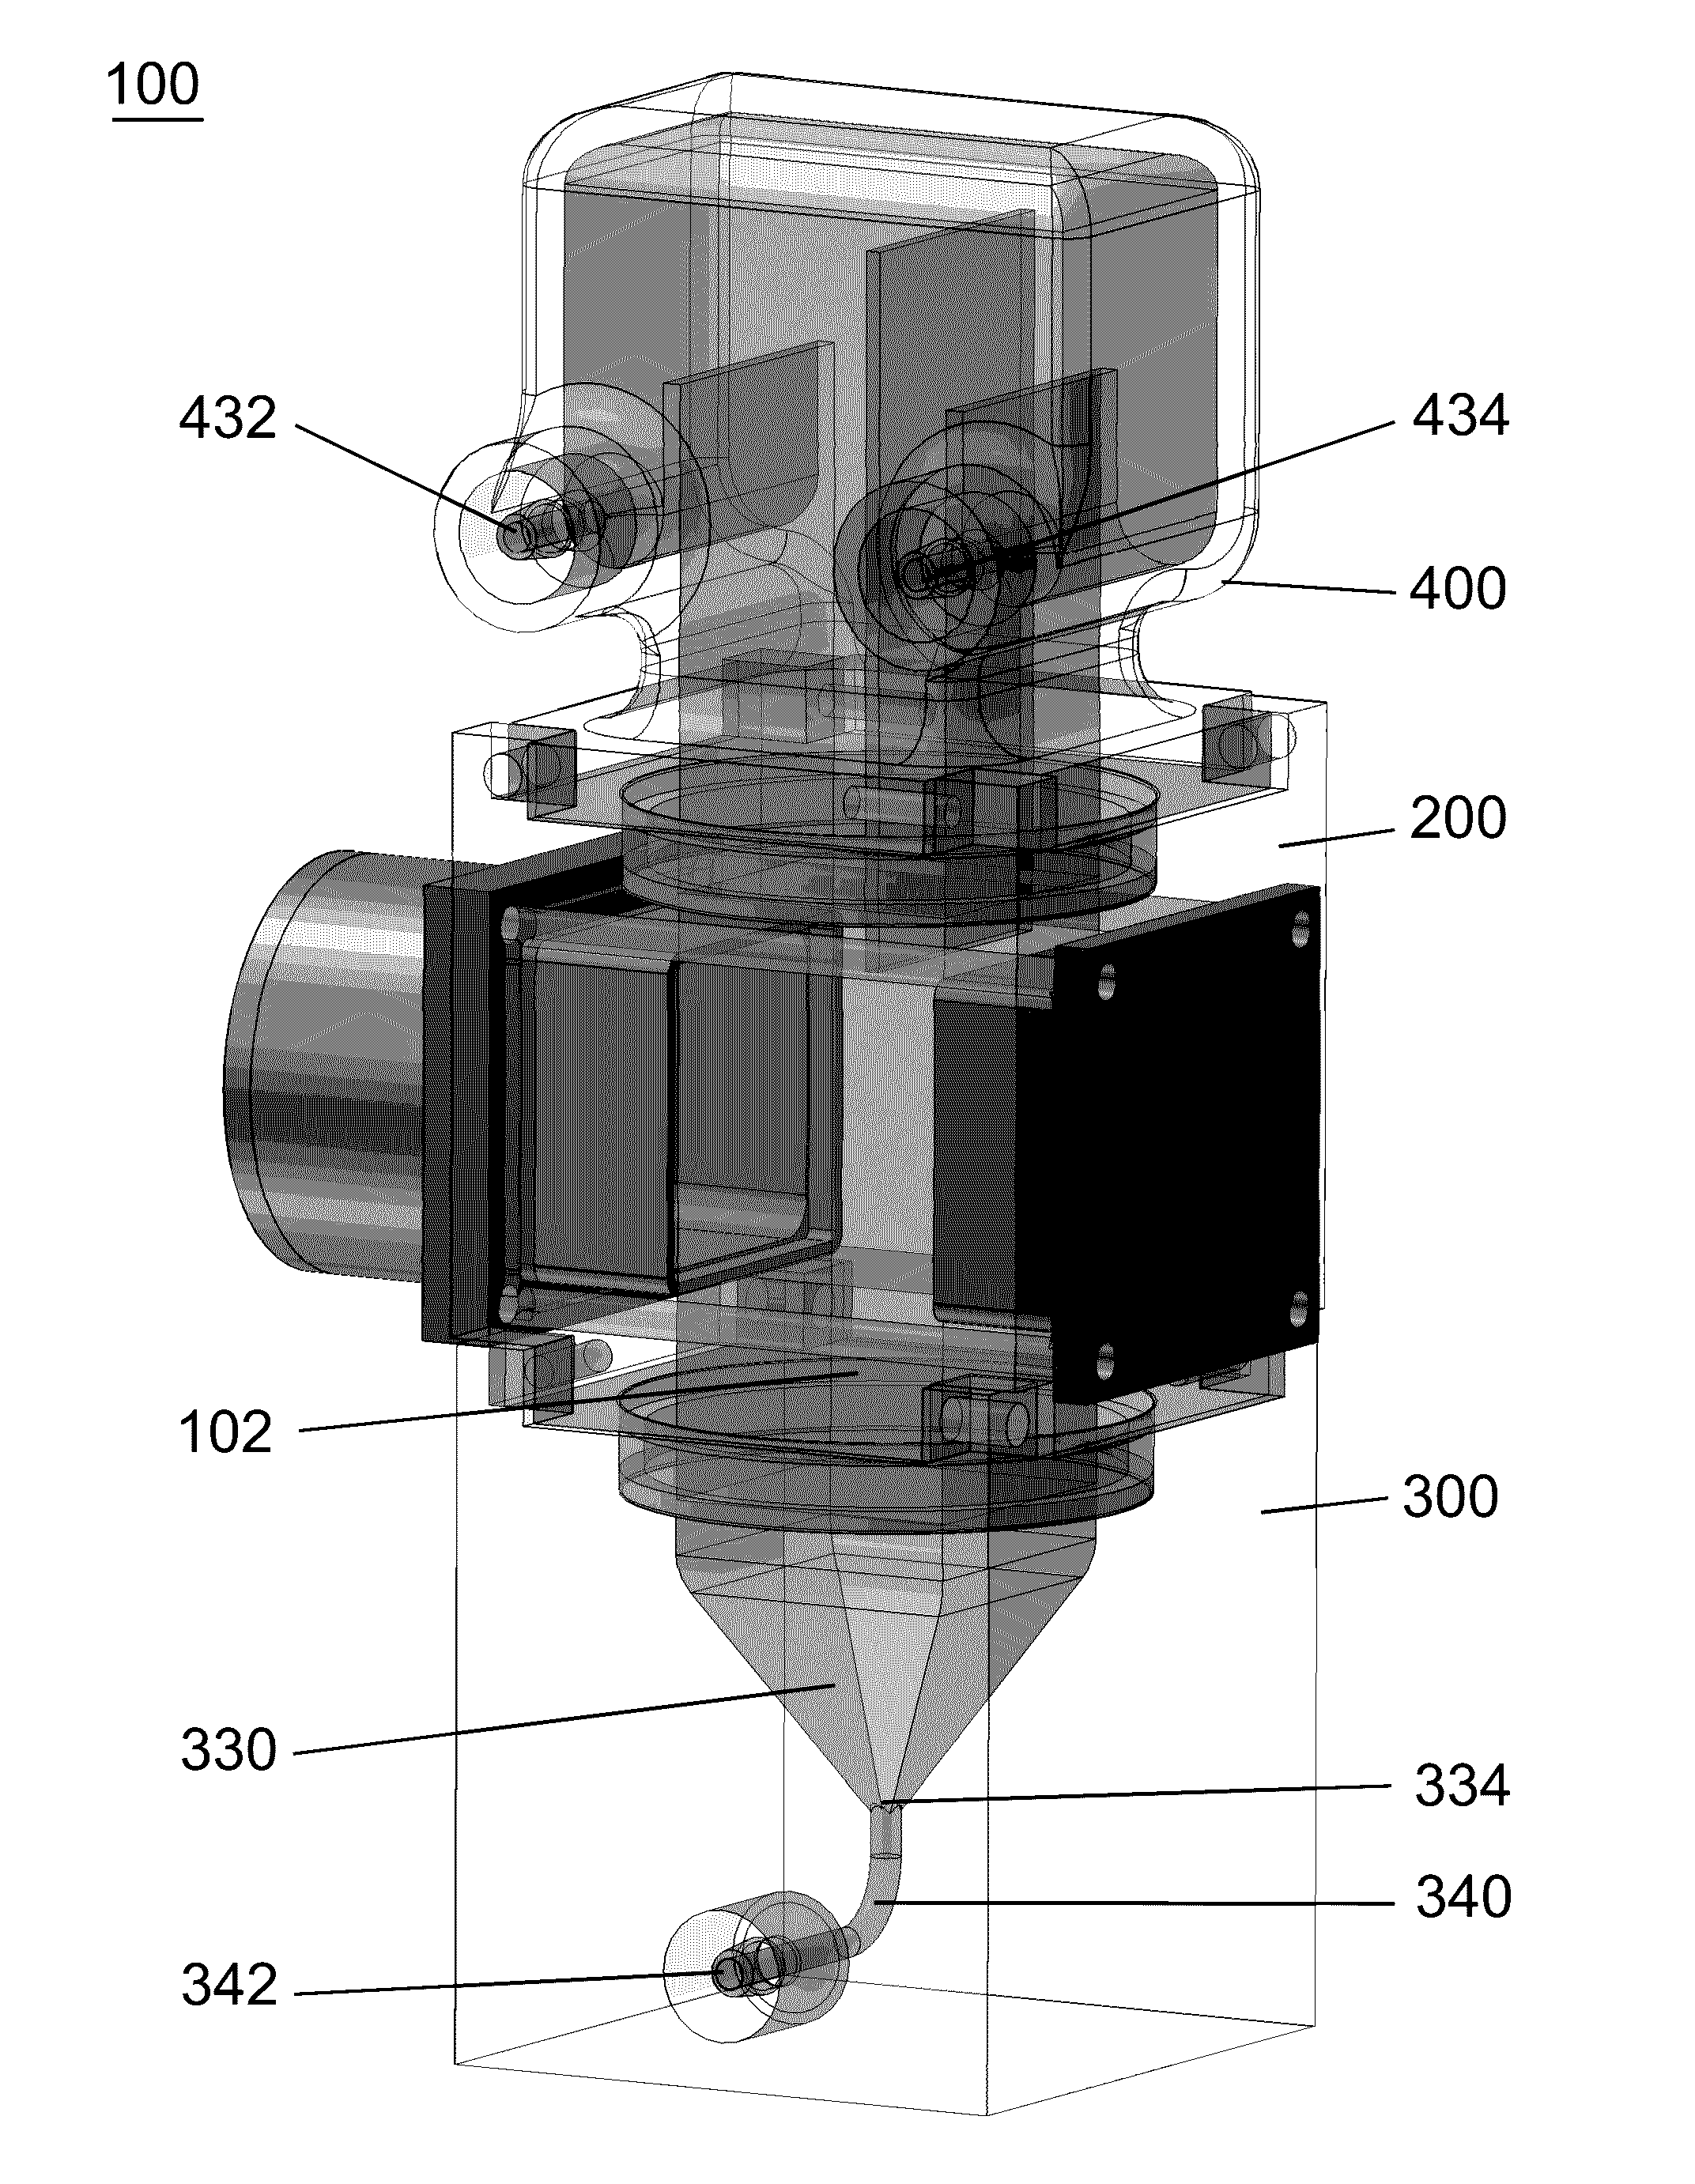 Acoustophoresis device with modular components